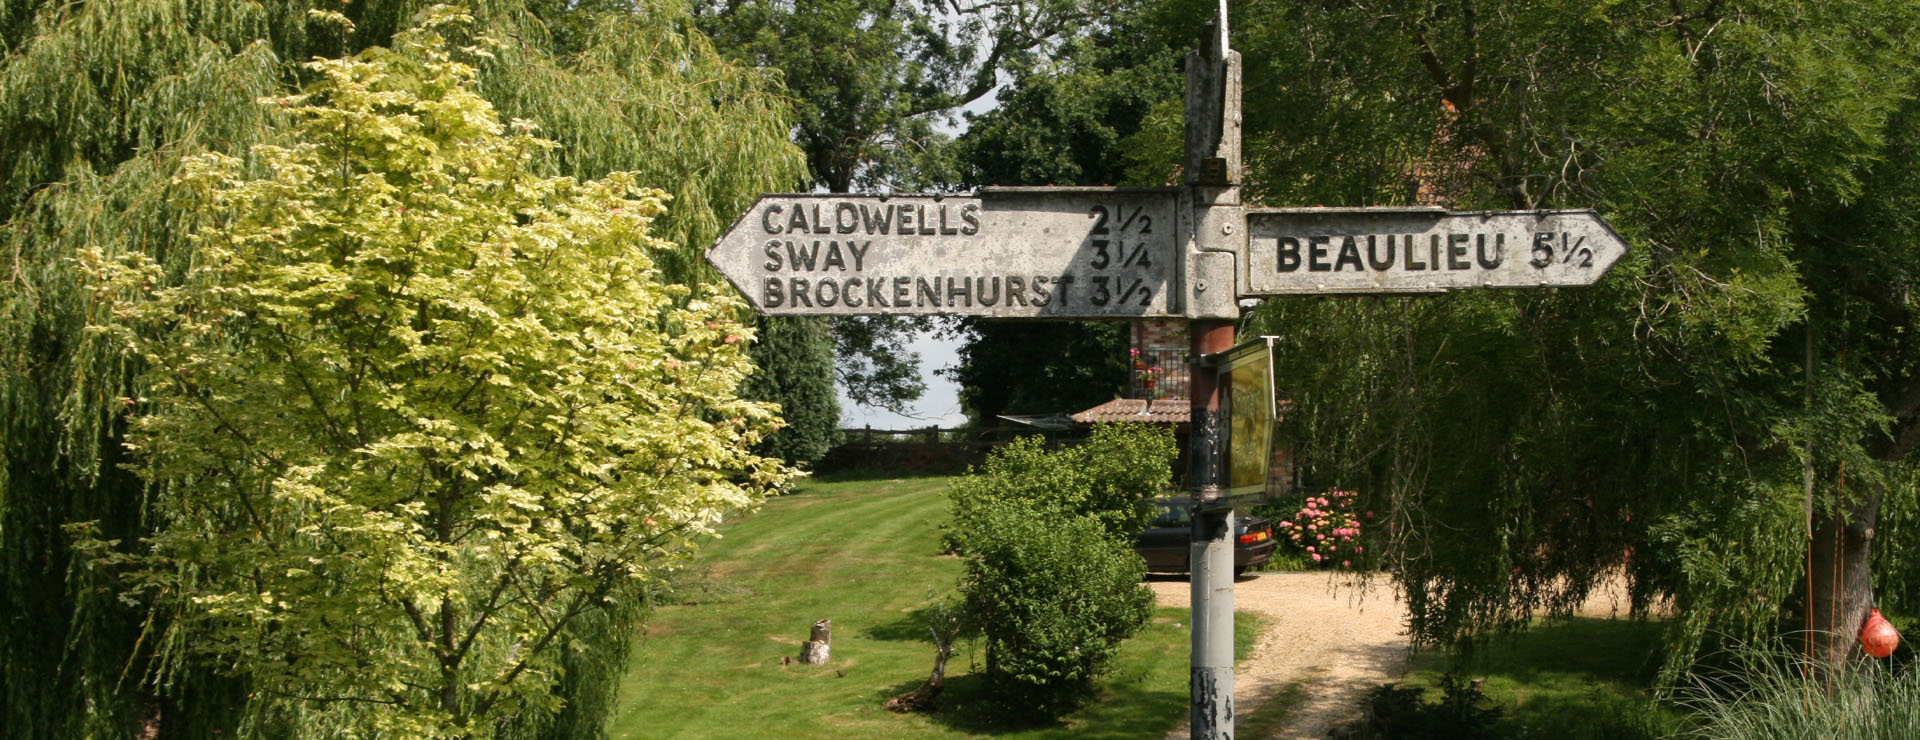 Photo of an old-style street sign with the distance to nearby villages